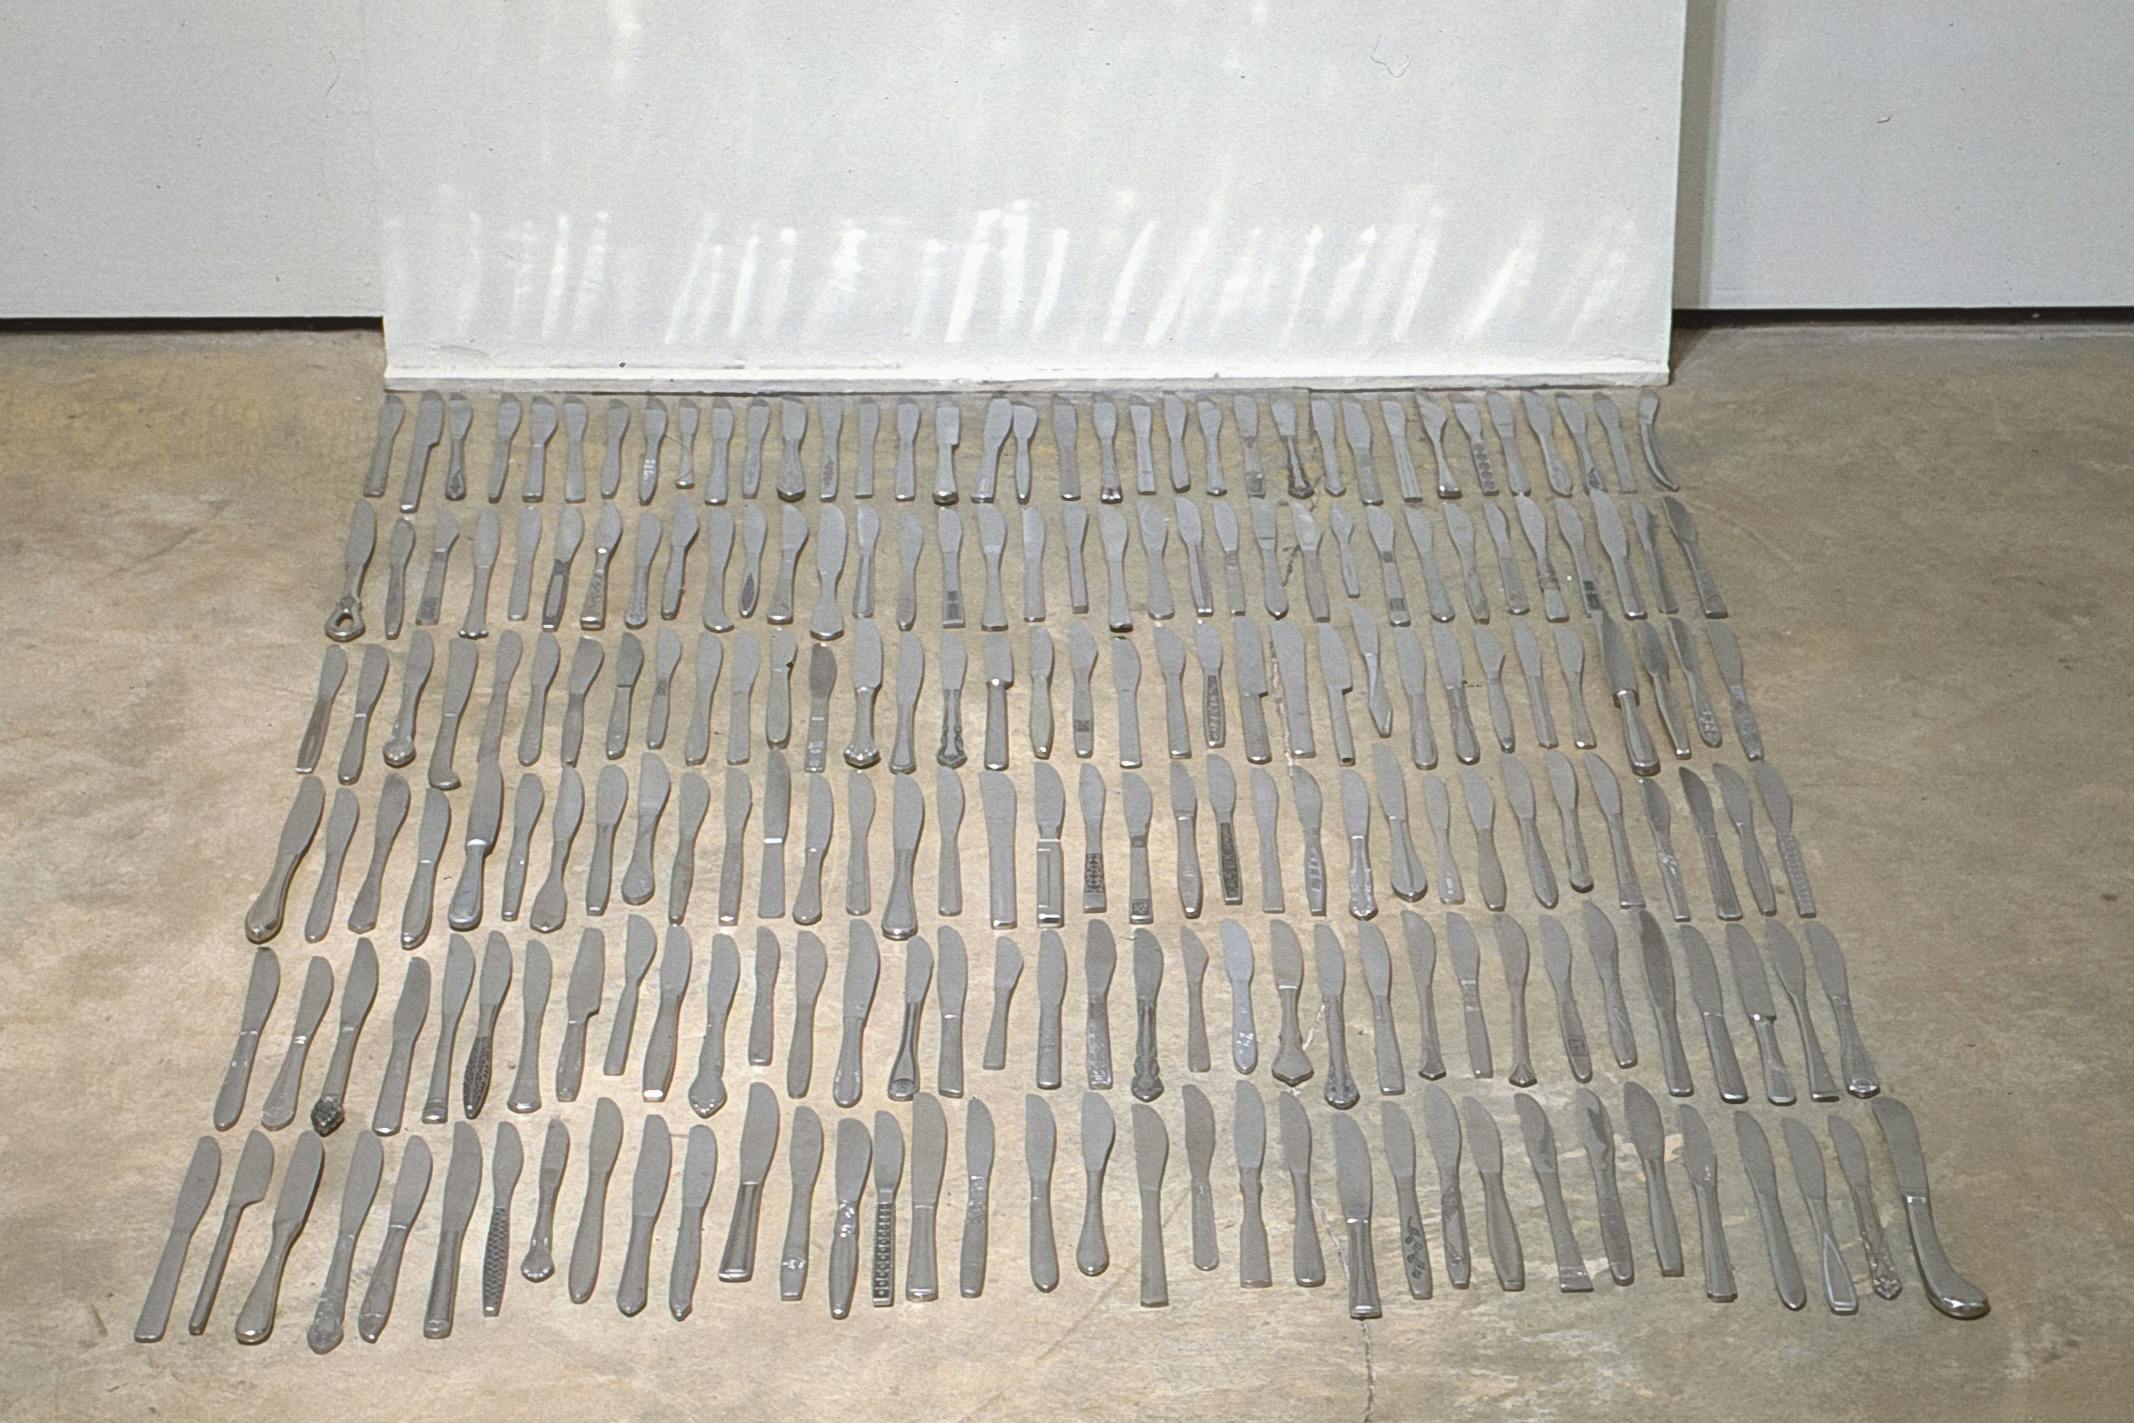 Six rows of thirty-five silver dinner knives are placed on the gallery floor. Those different sets of knives face their cutting edges to the right and point to the white wall.  